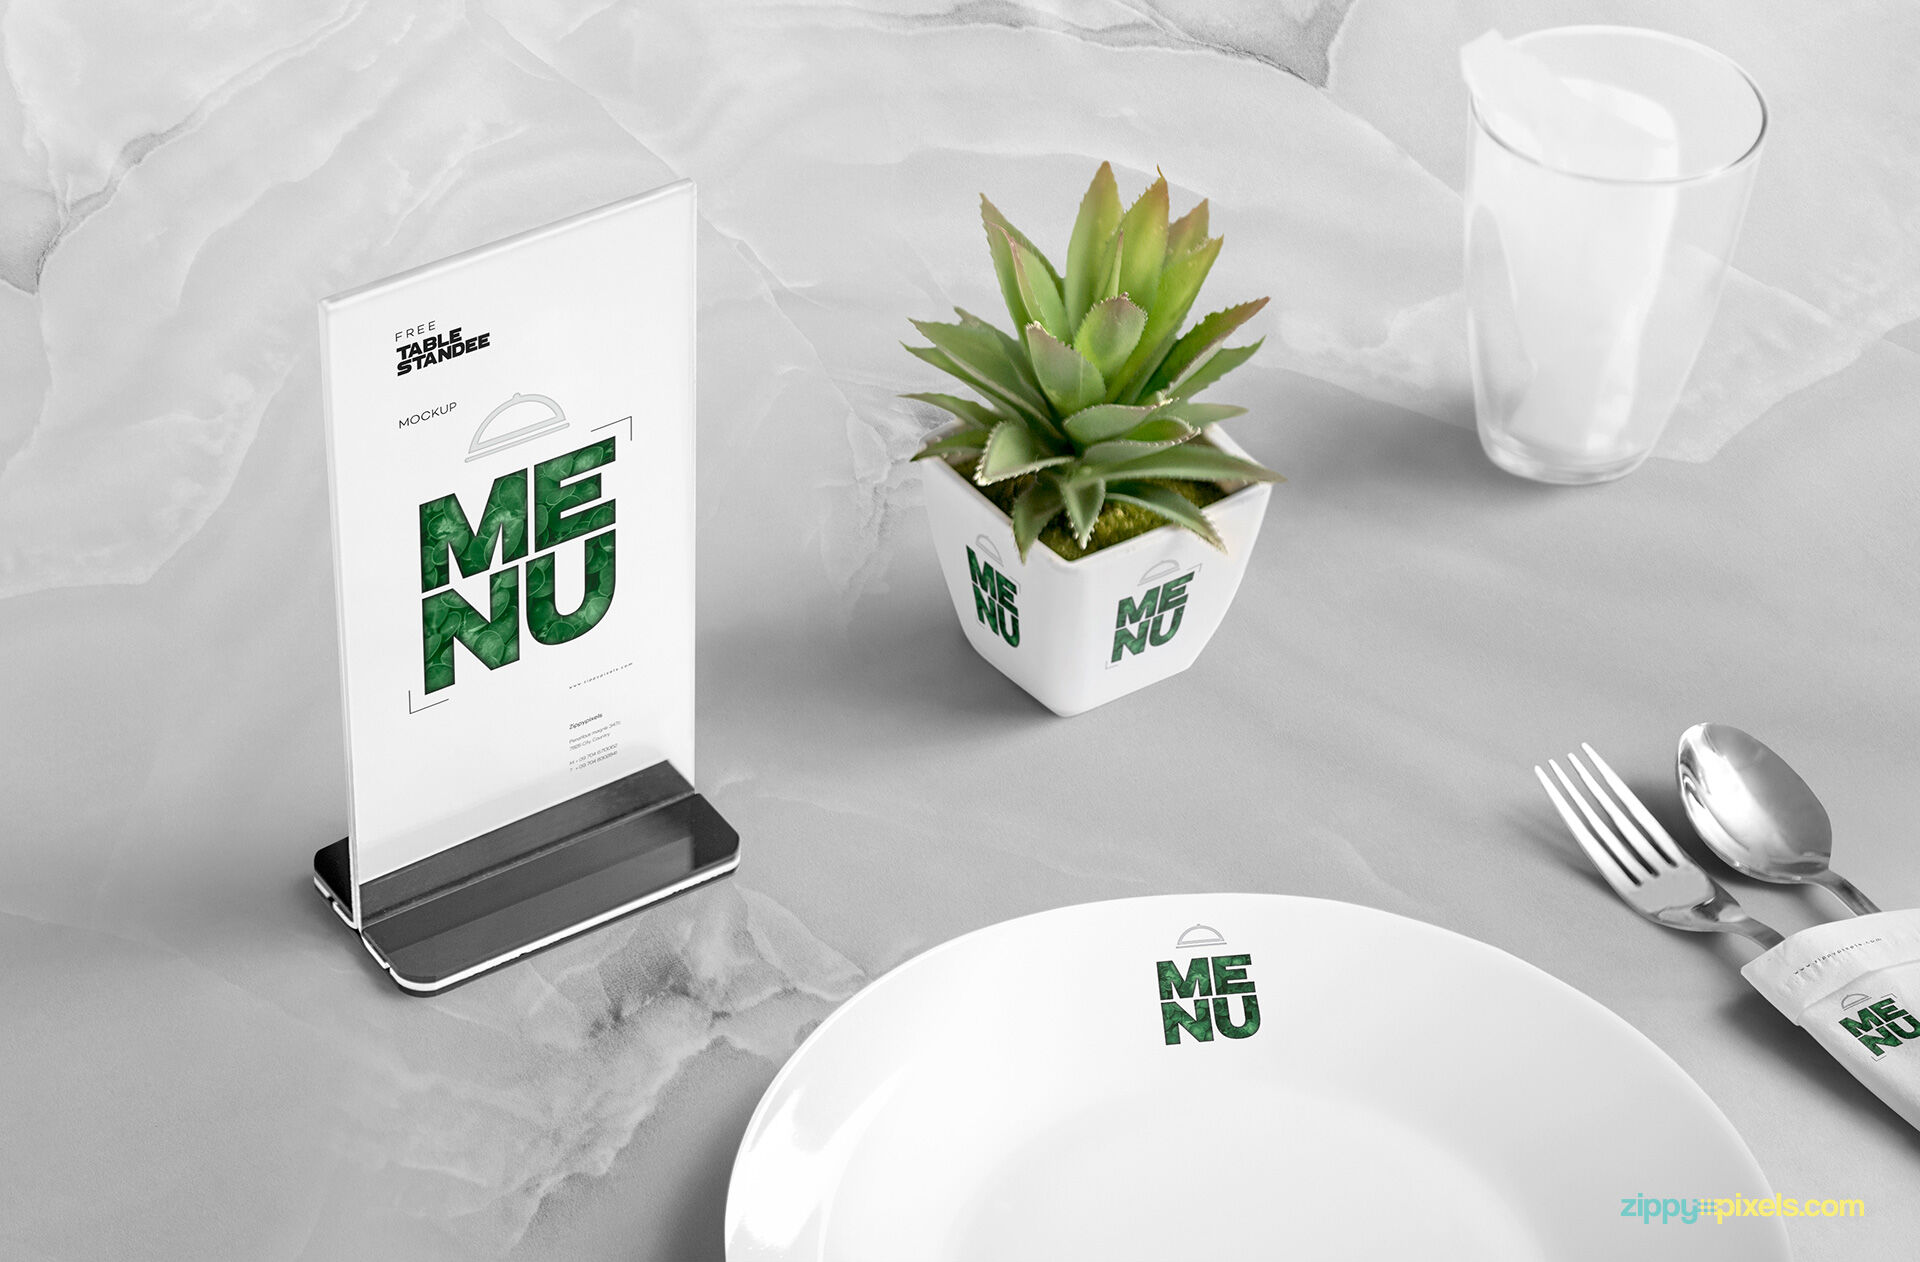 Table Menu Standee Mockup Scene with Plant, Glass, and Plate FREE PSD